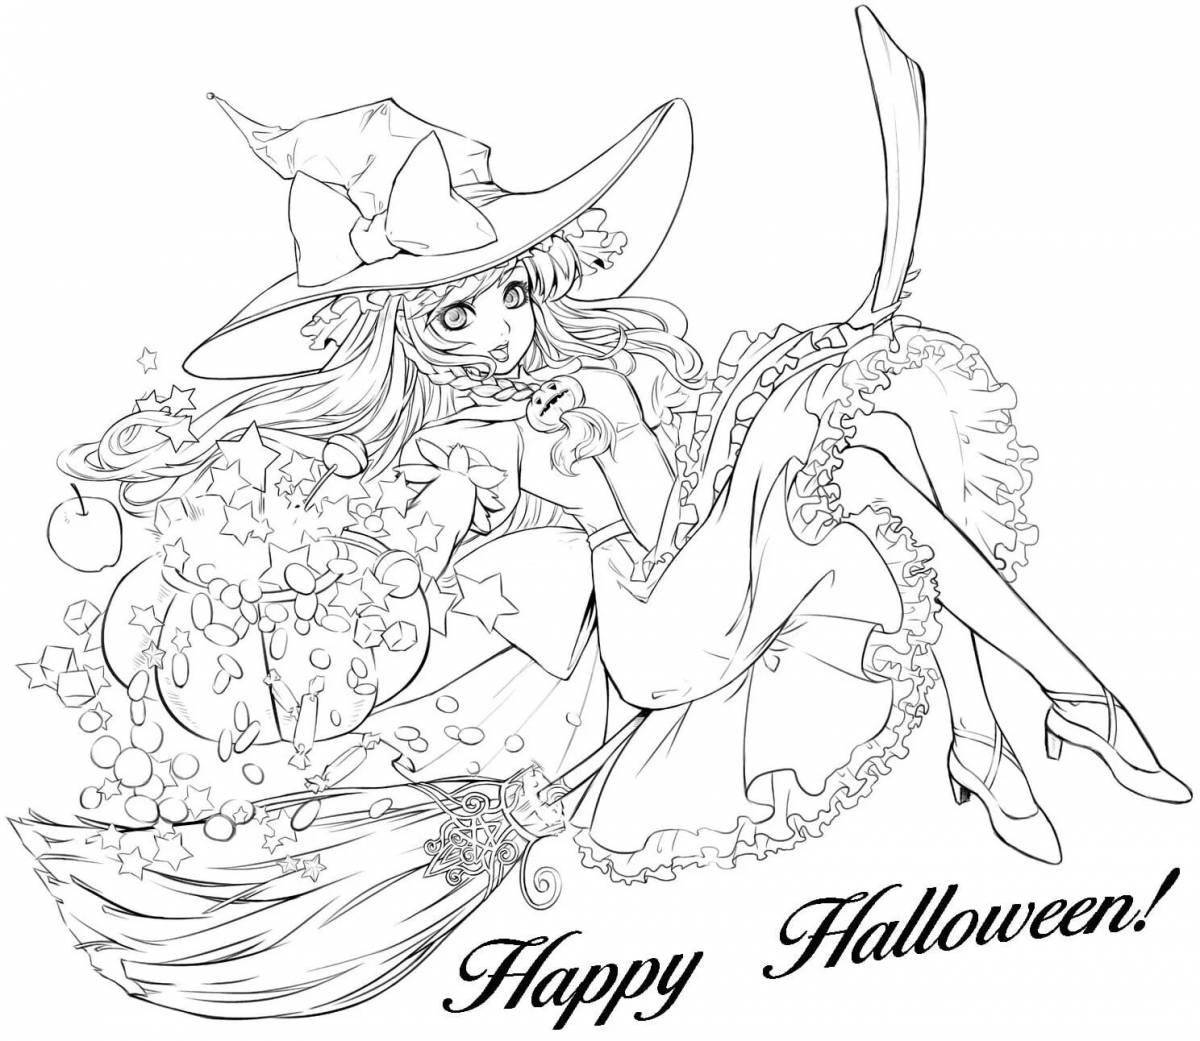 Thoughtful coloring book for real witches